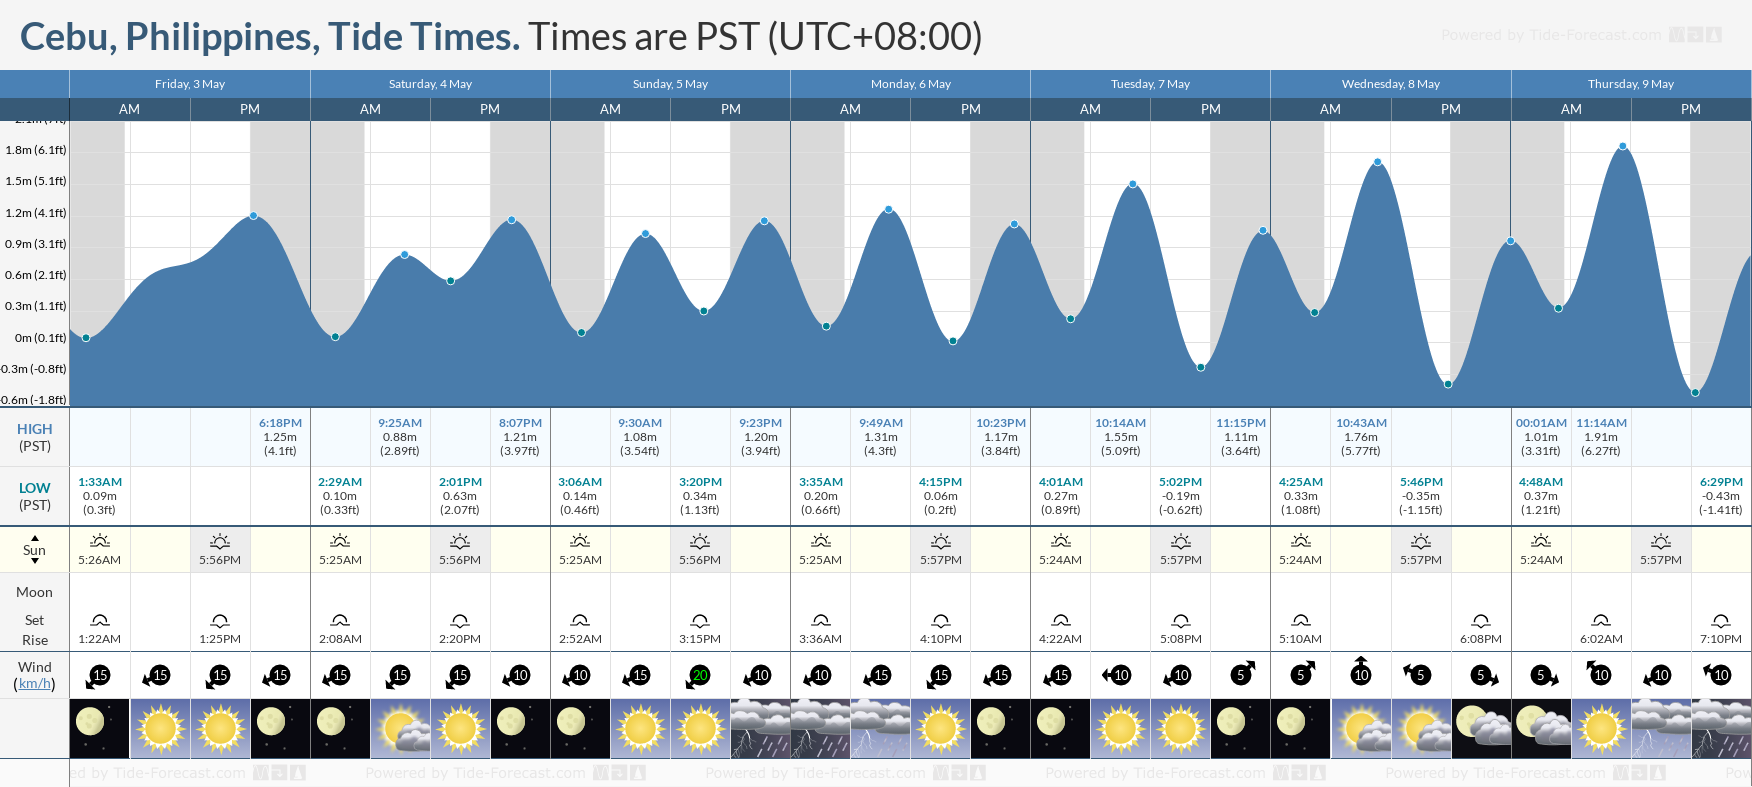 Cebu, Philippines Tide Chart including high and low tide tide times for the next 7 days